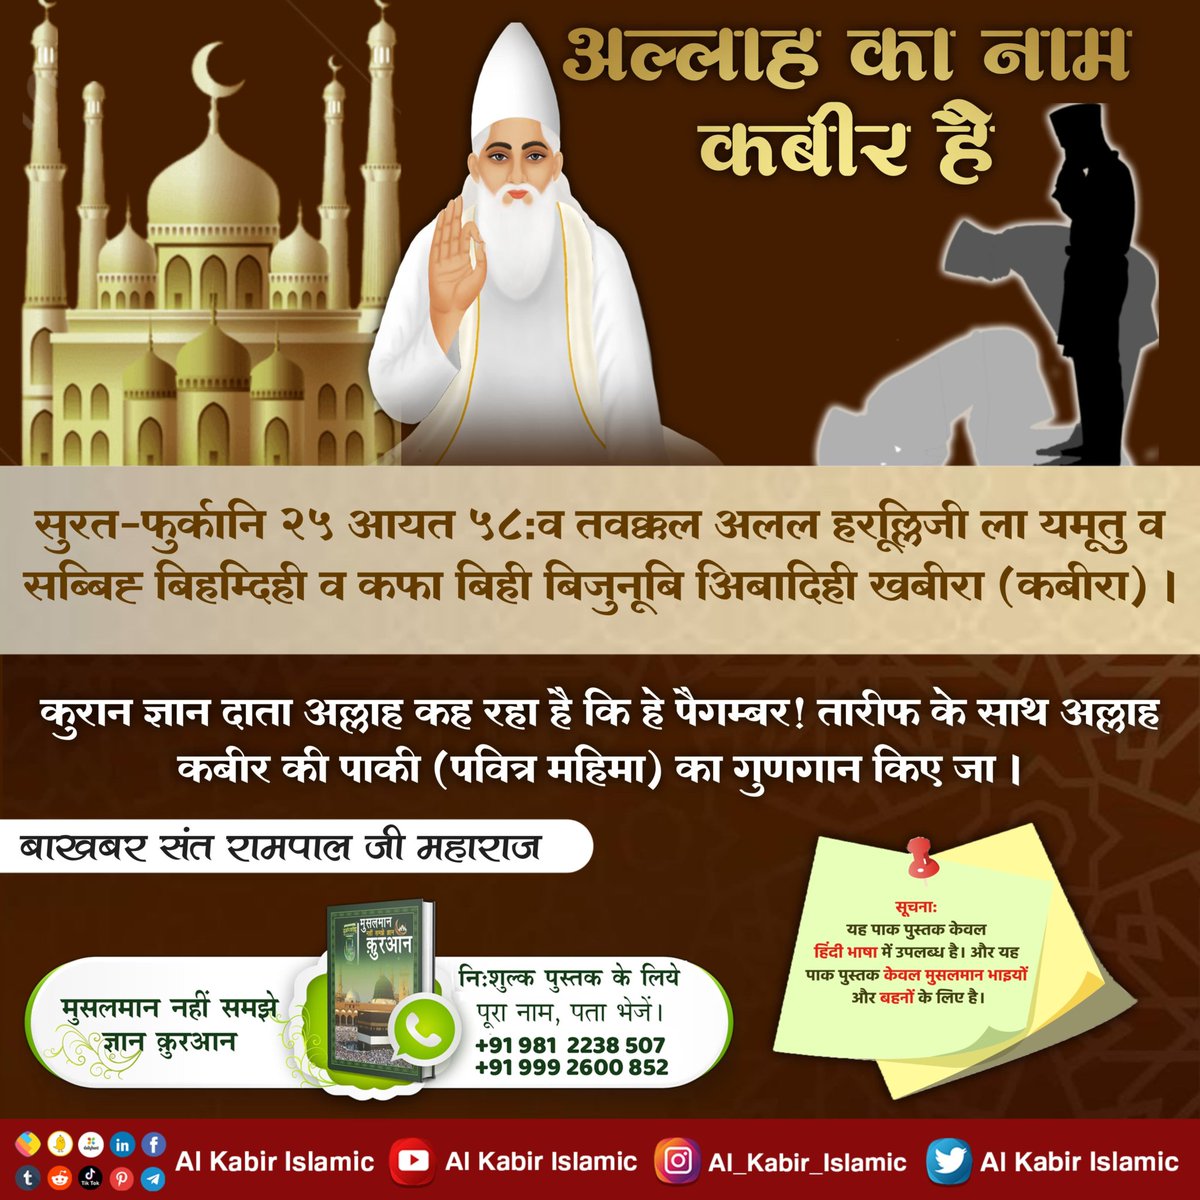 #GodNightMonday
The name of Allah is Kabir!
Surat-Fuqarqani 25 Verse 58: Quran Knowledge giver Allah is saying that O Prophet! Sing the praise of the purity (holy glory) of Allah Kabir with praise.
Visit Saint Rampal Ji Maharaj YouTube Channel 
#MondayMotivation